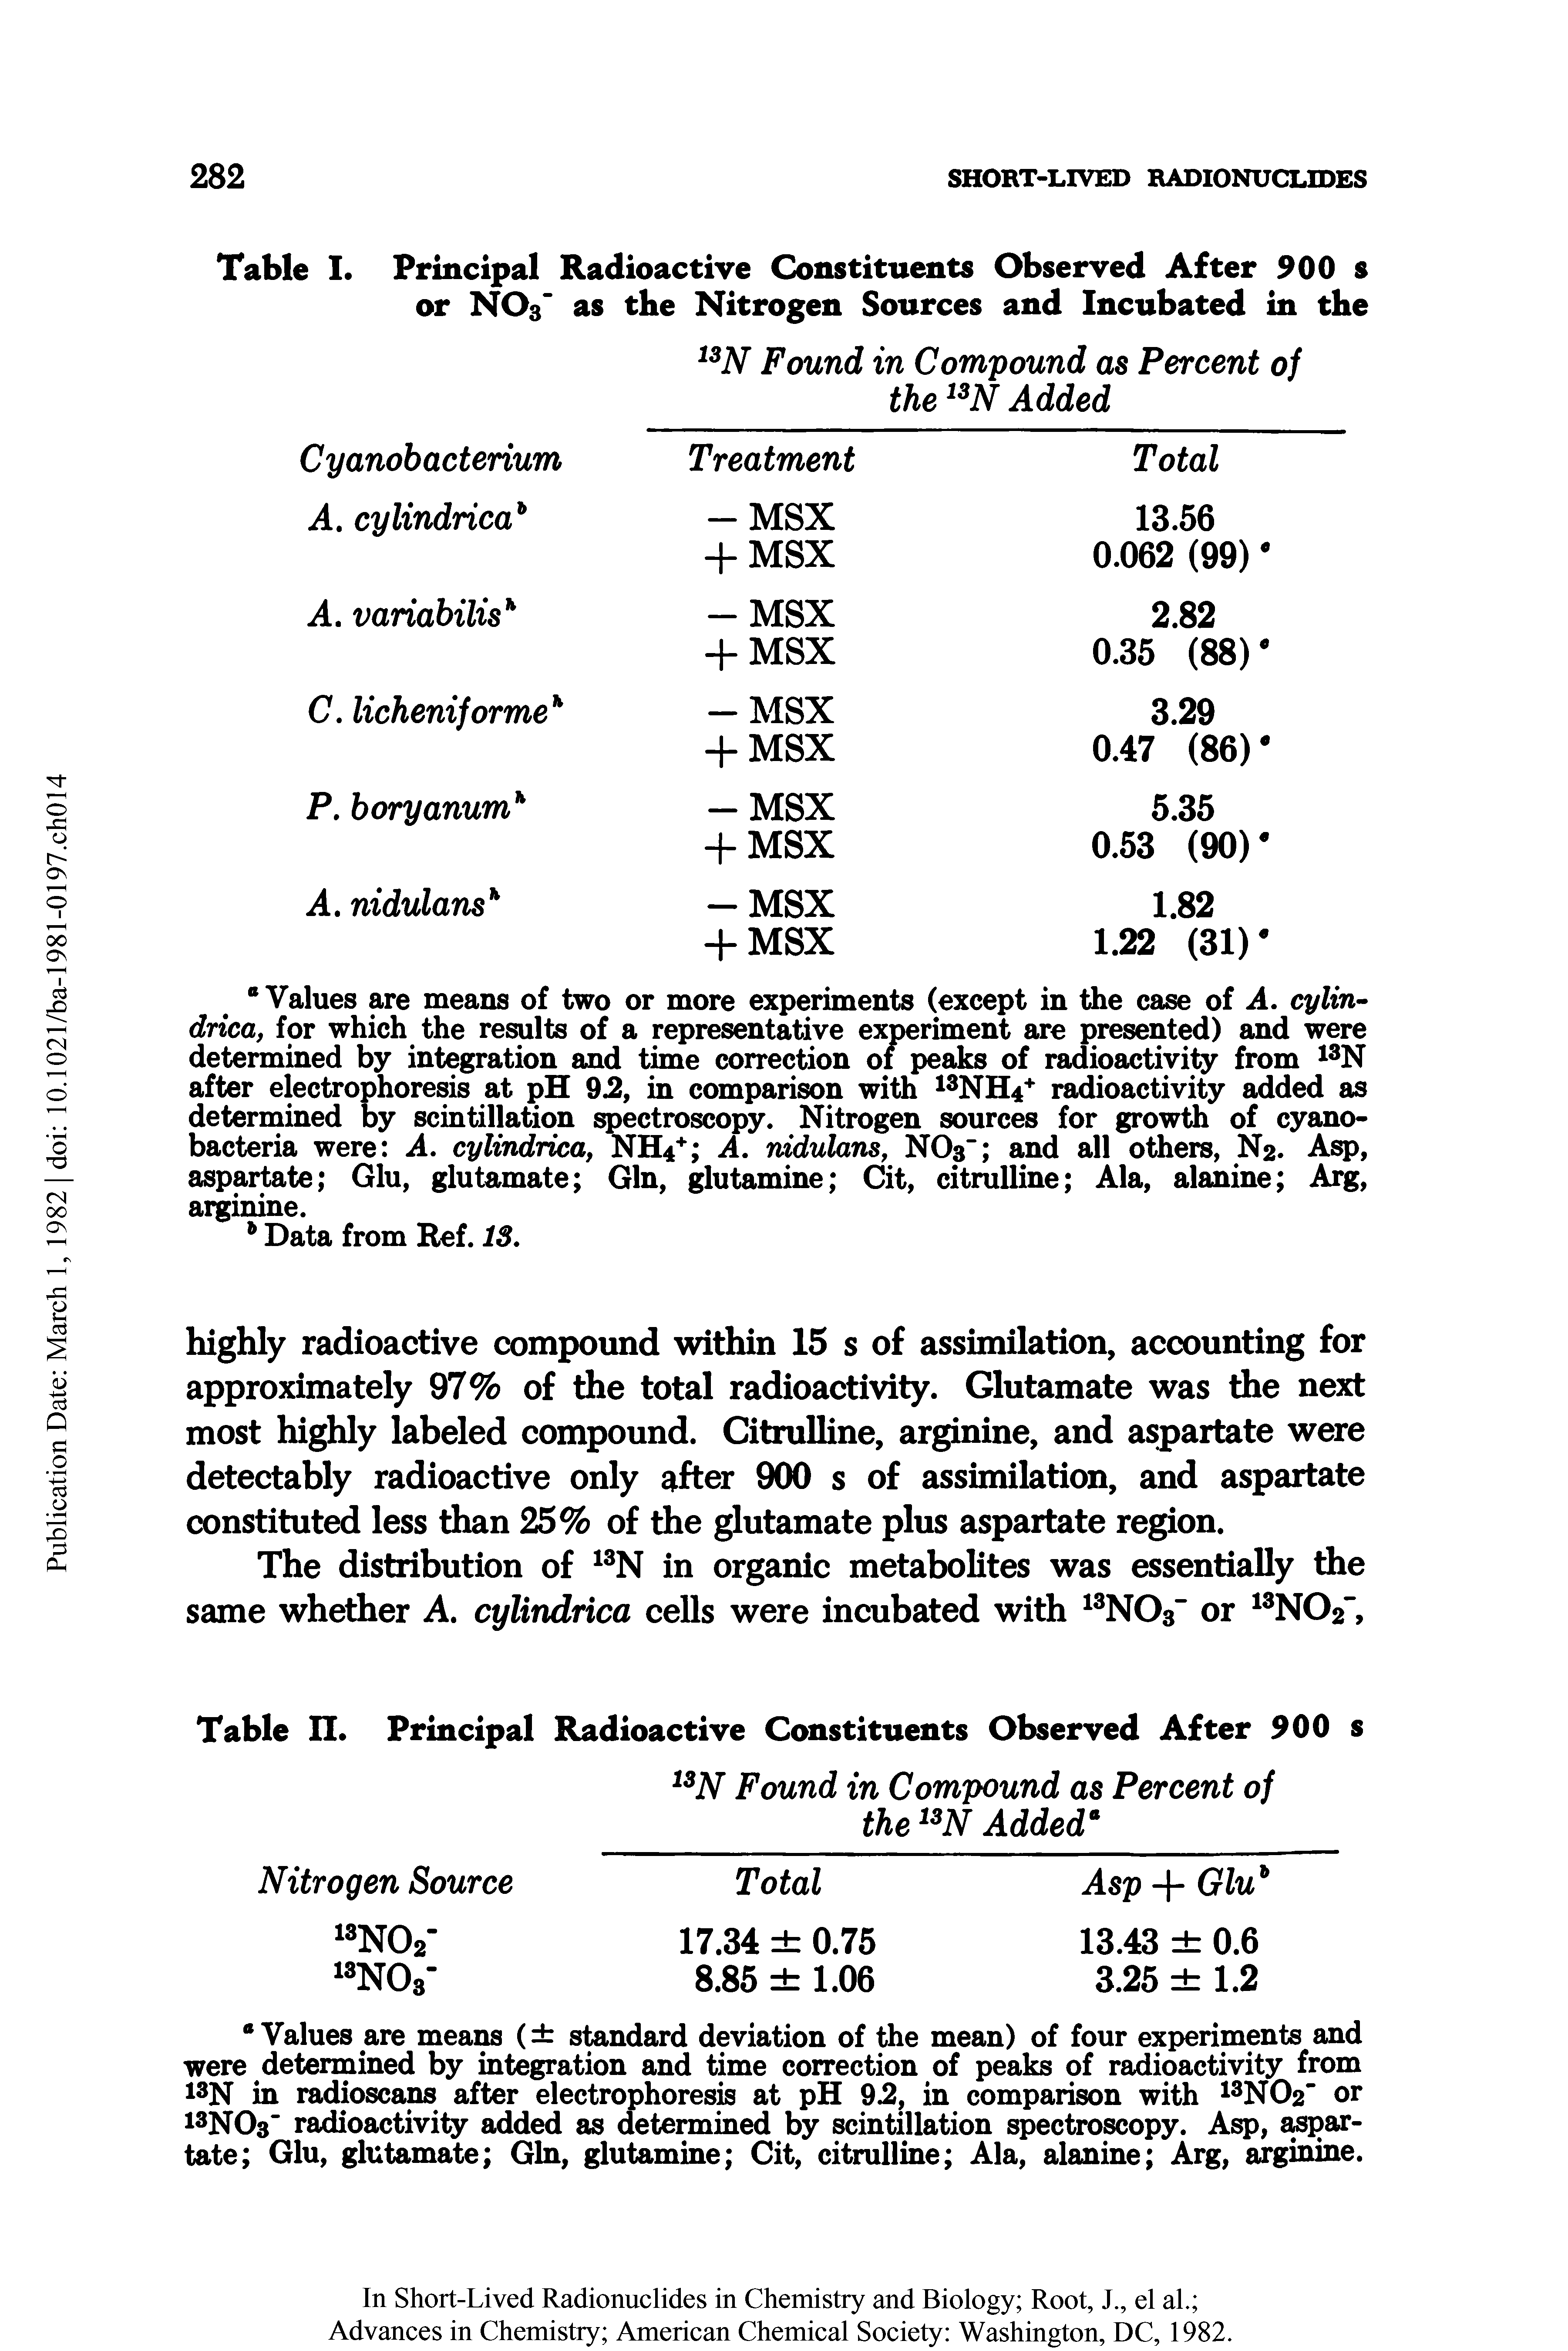 Table I. Principal Radioactive Constituents Observed After 900 s or NOs as the Nitrogen Sources and Incubated in the...